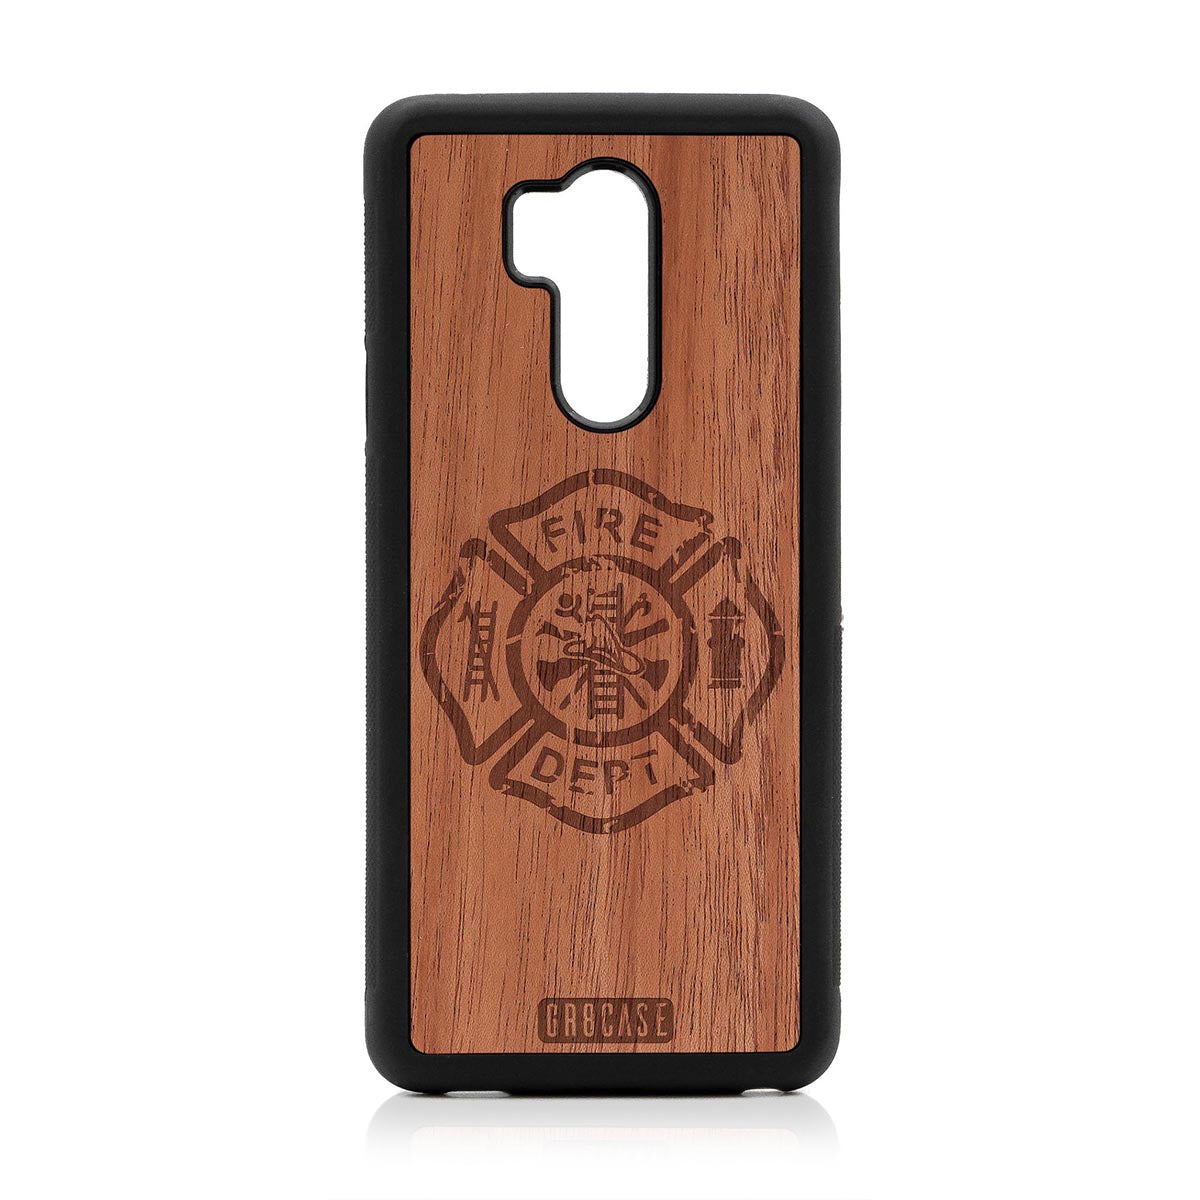 Fire Department Design Wood Case LG G7 ThinQ by GR8CASE